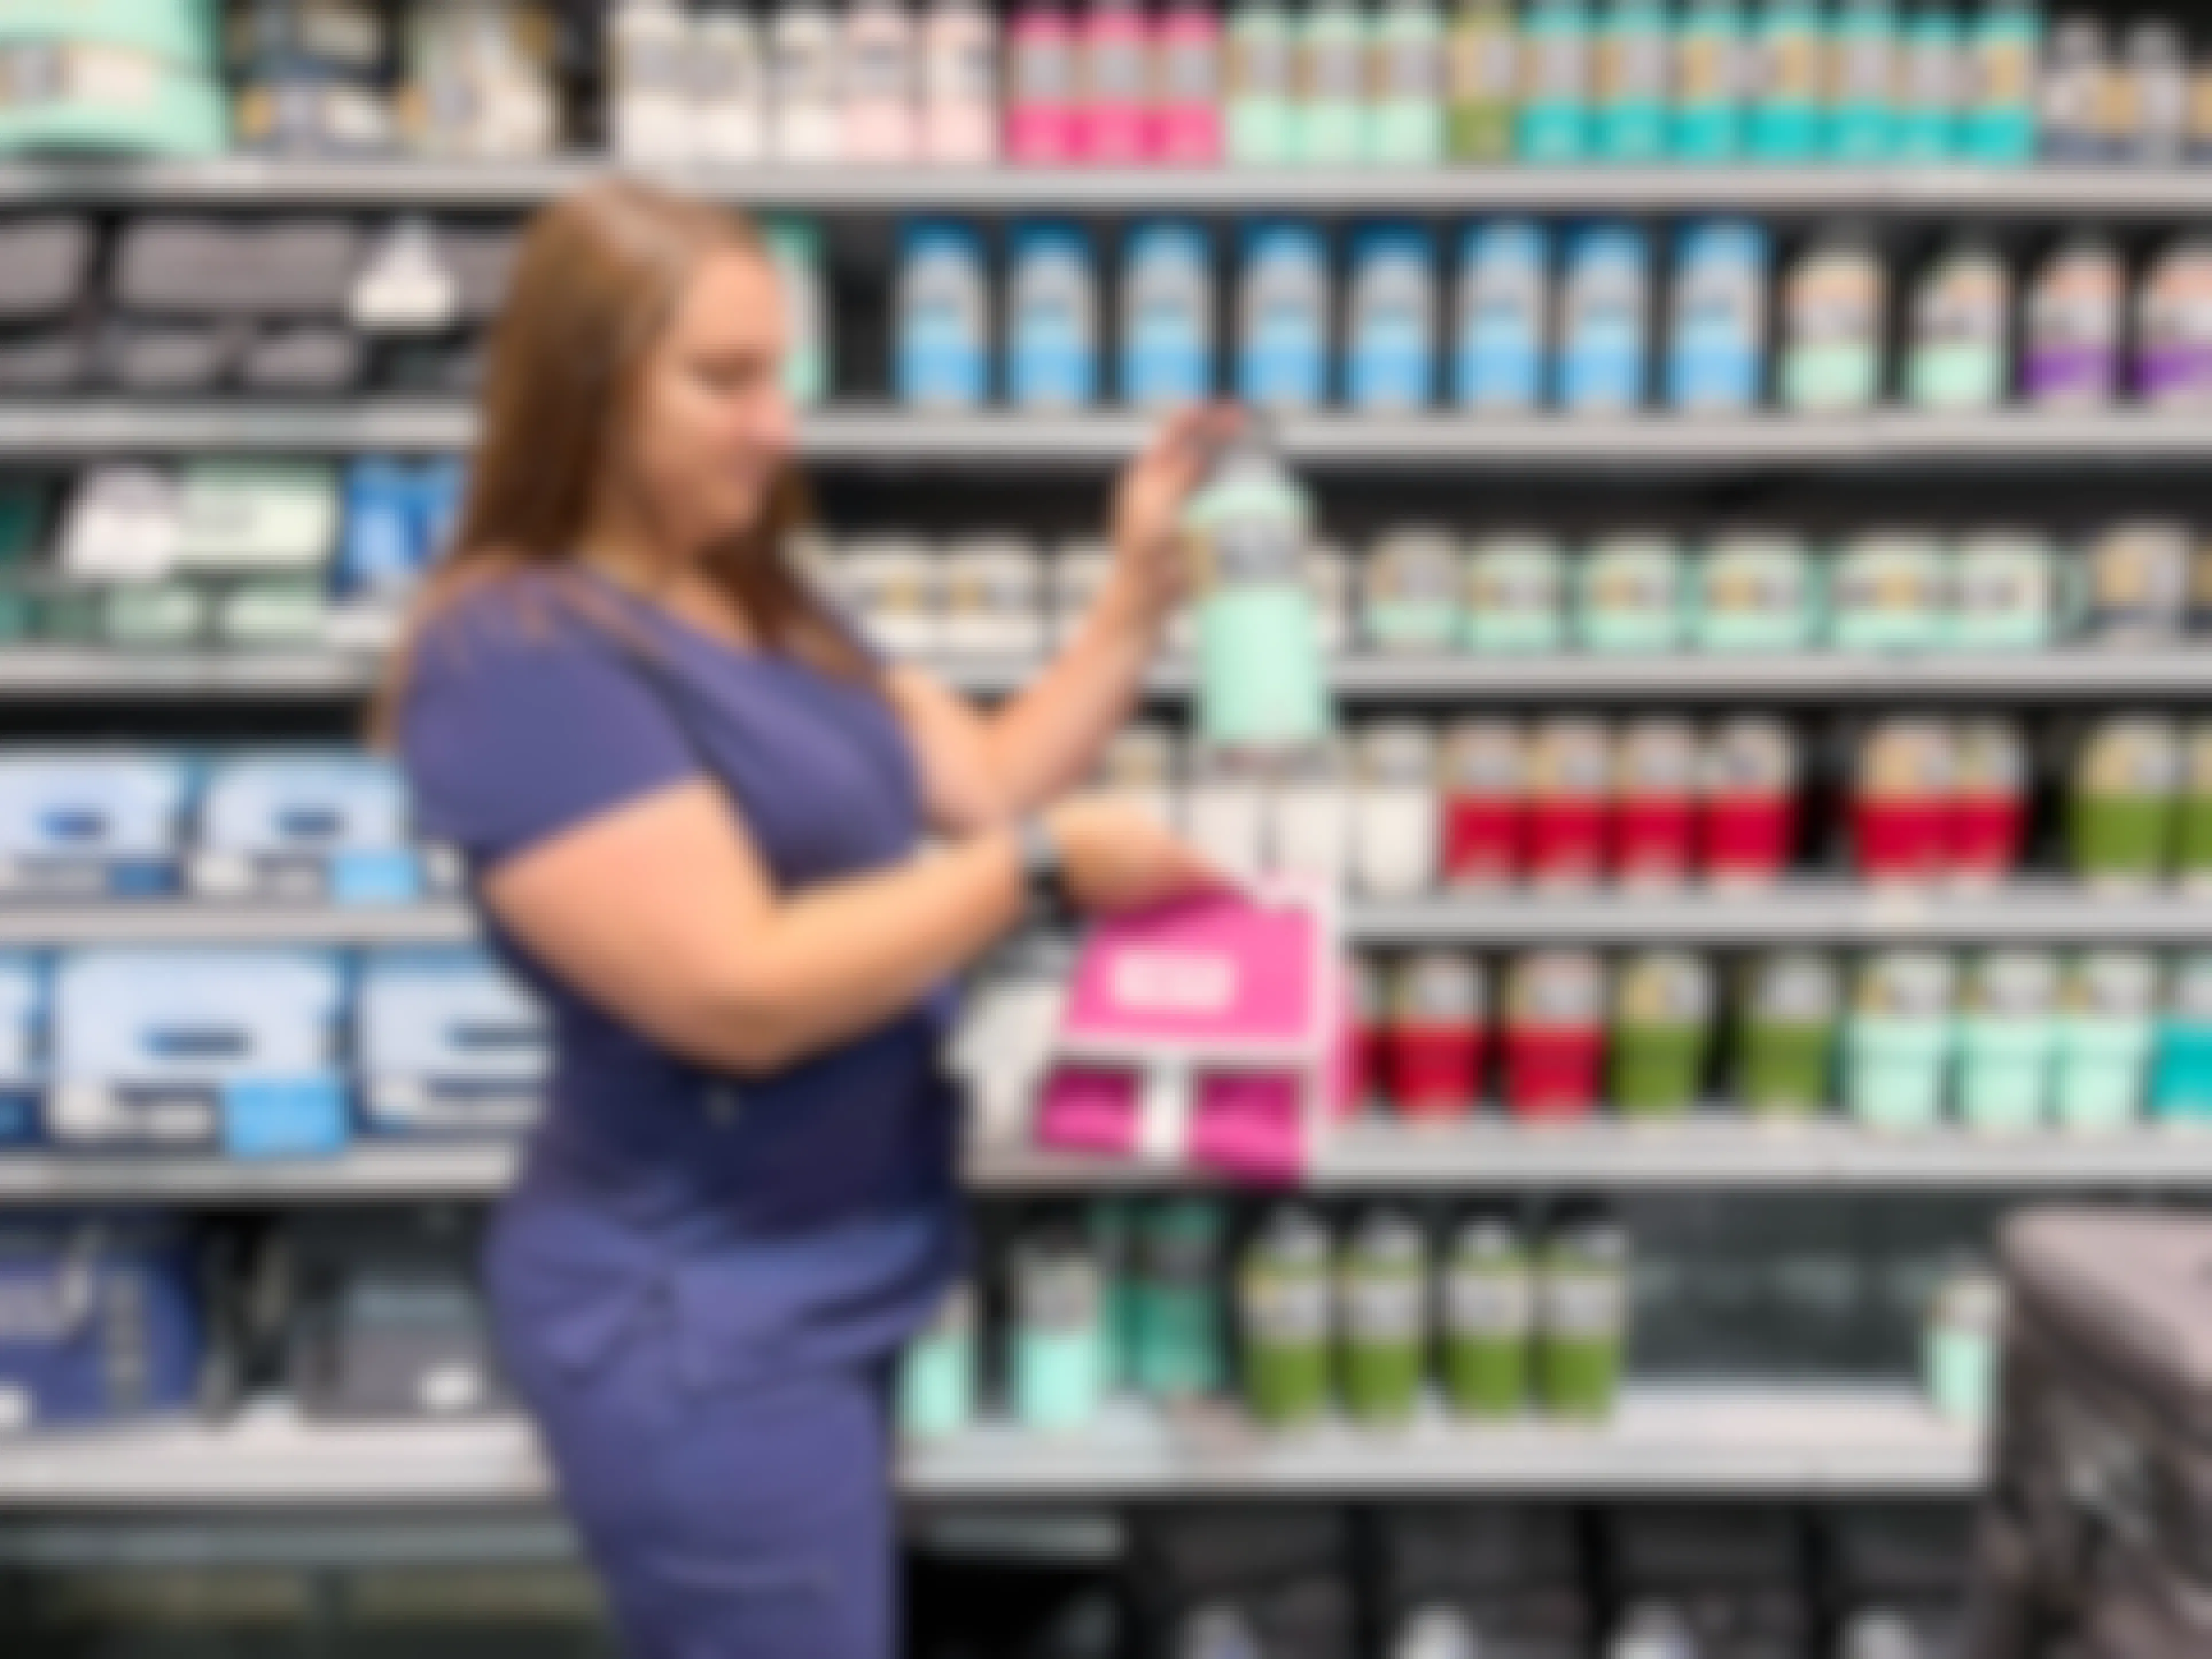 21 Companies That Offer Healthcare Worker Discounts